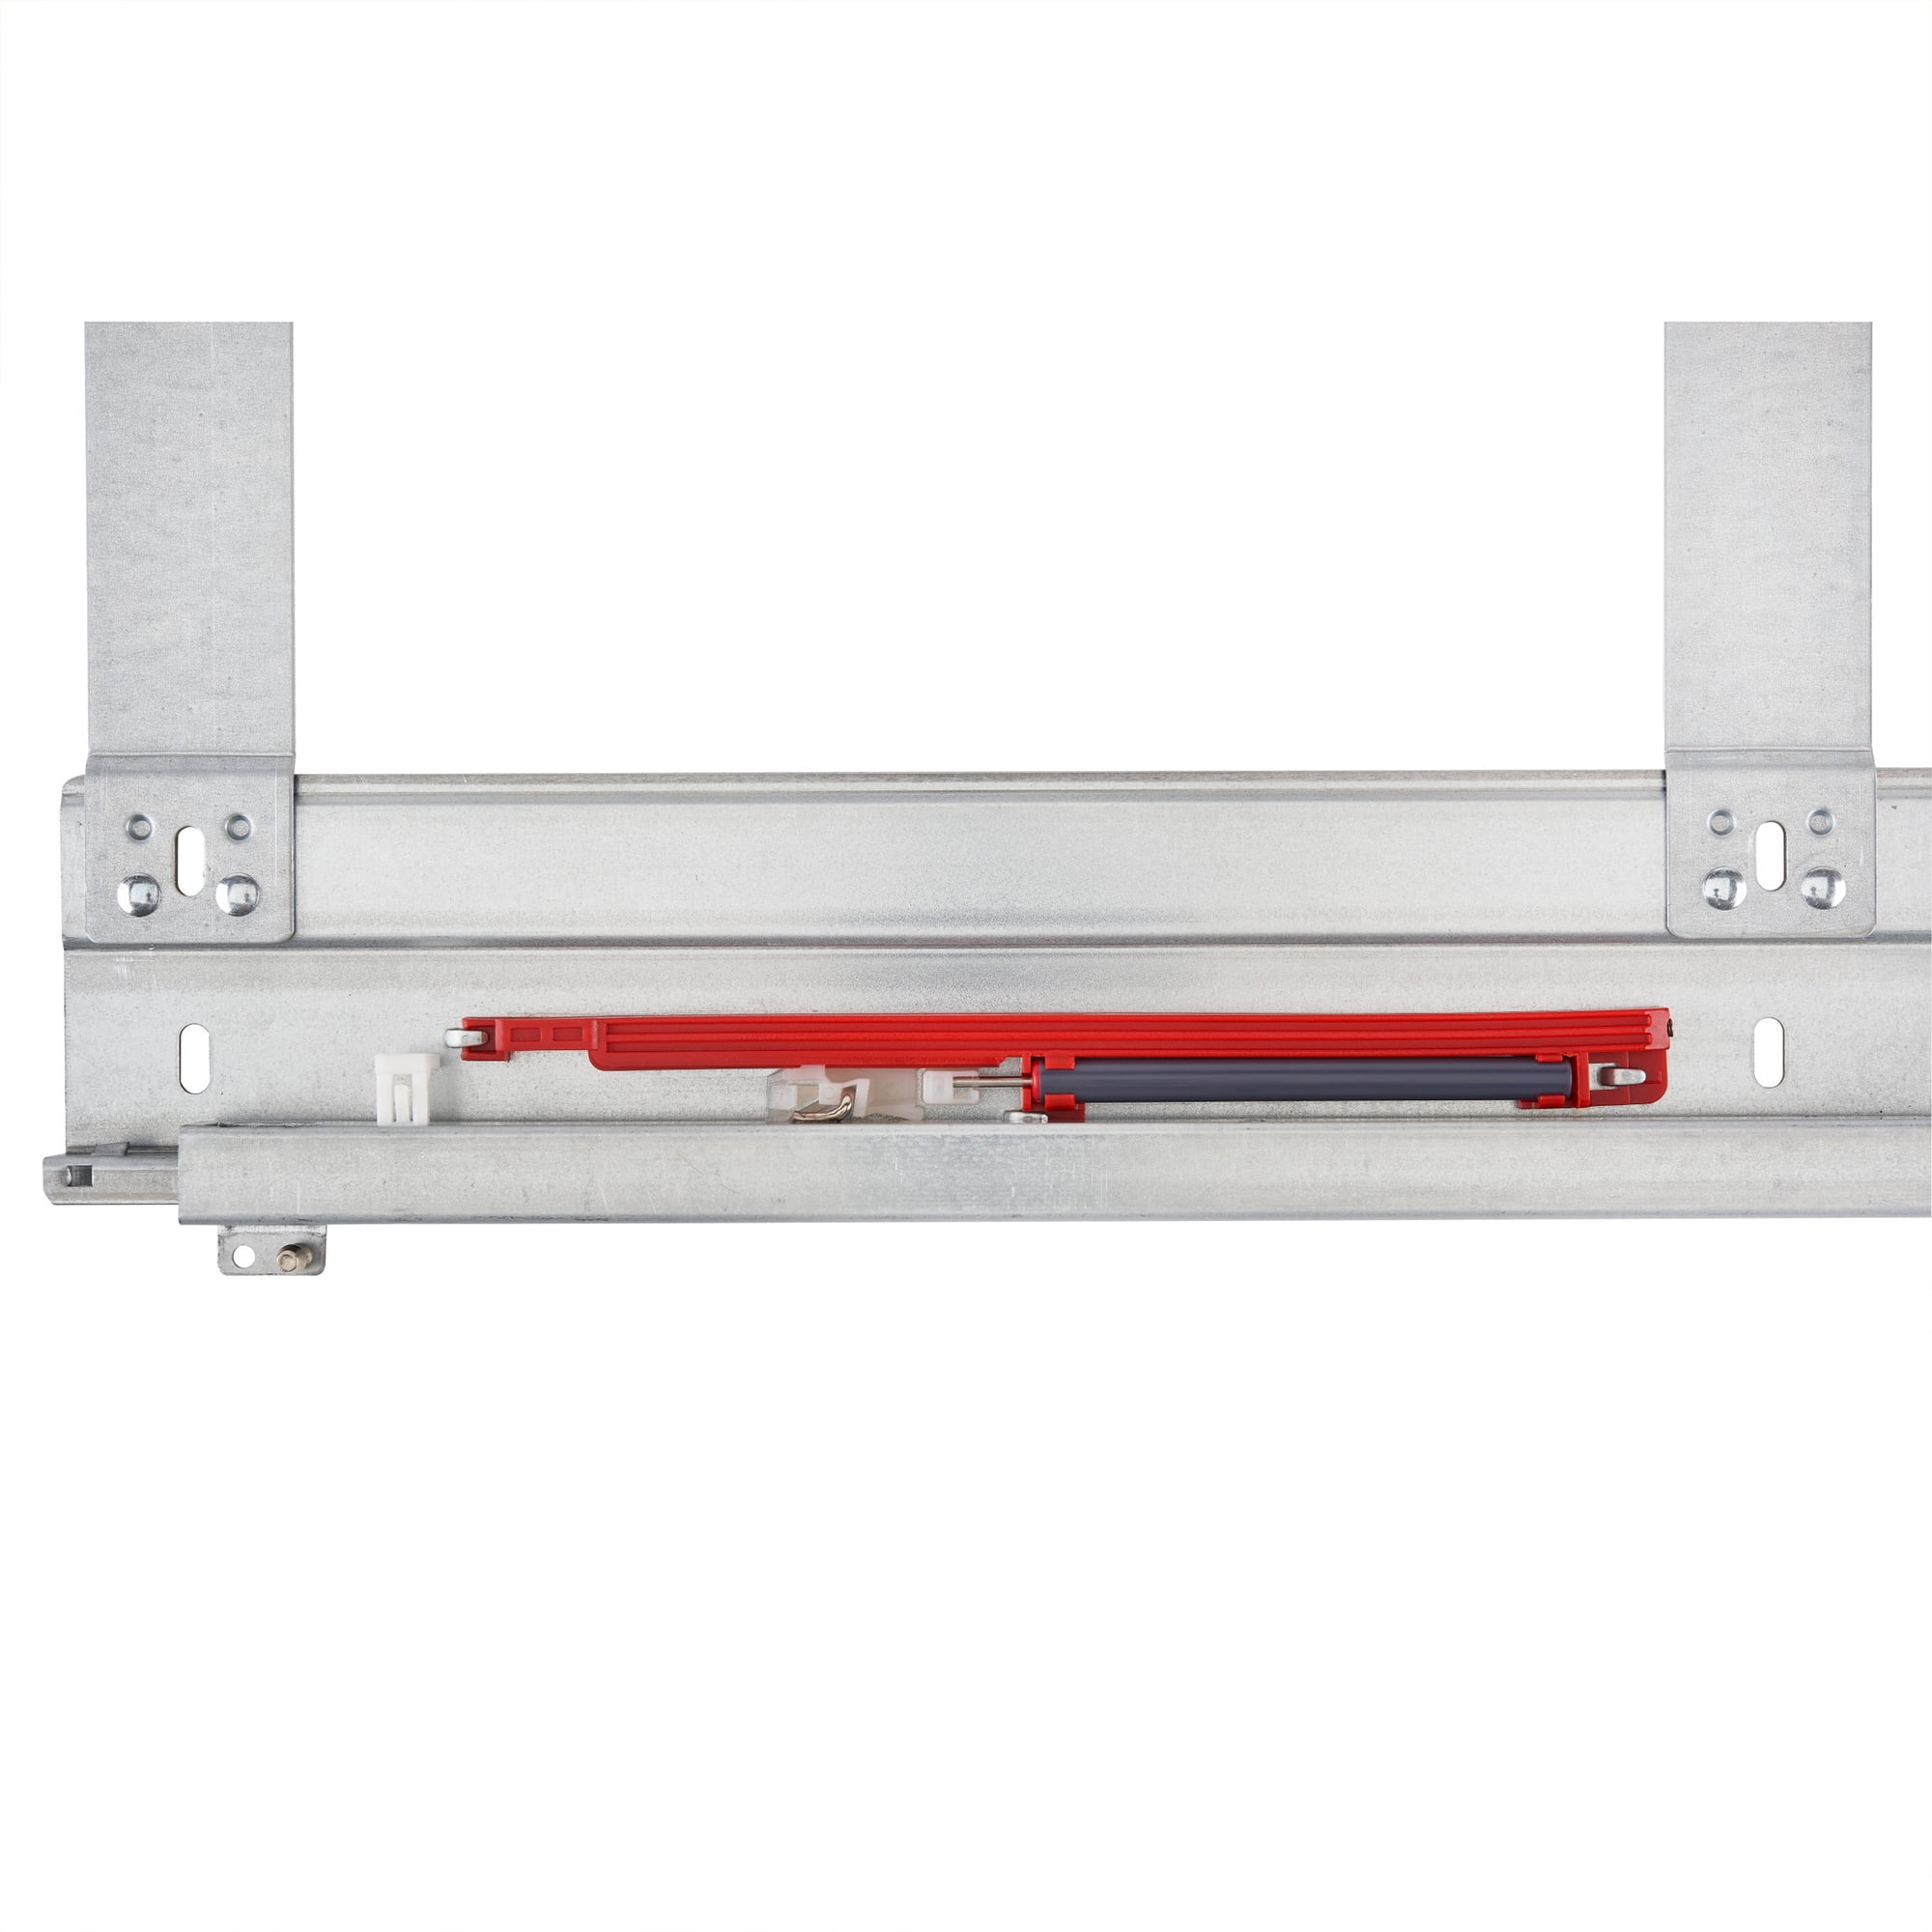 Preassembled Rollout Drawer Shelf System for 12 - 33 Cabinet Openings,  with 21 Undermount Soft Closing Drawer Slides, by Hardware Resources